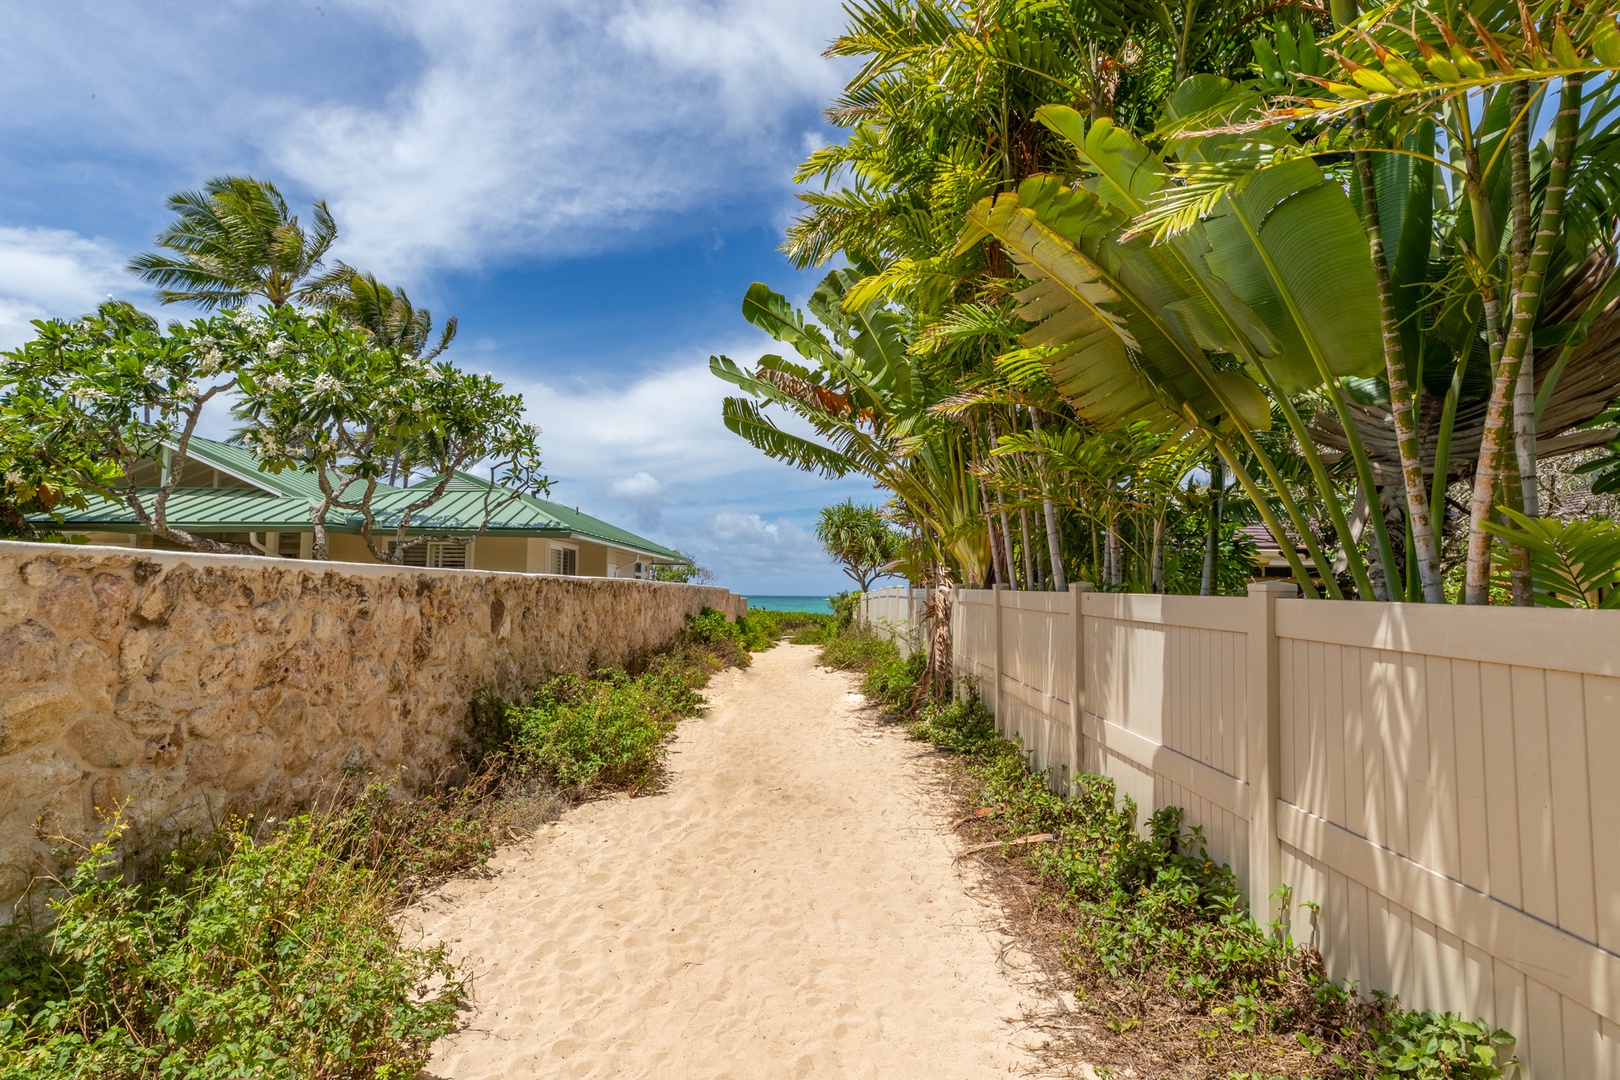 Kailua Vacation Rentals, Lanikai Breeze - The sandy path leads to turquoise waters